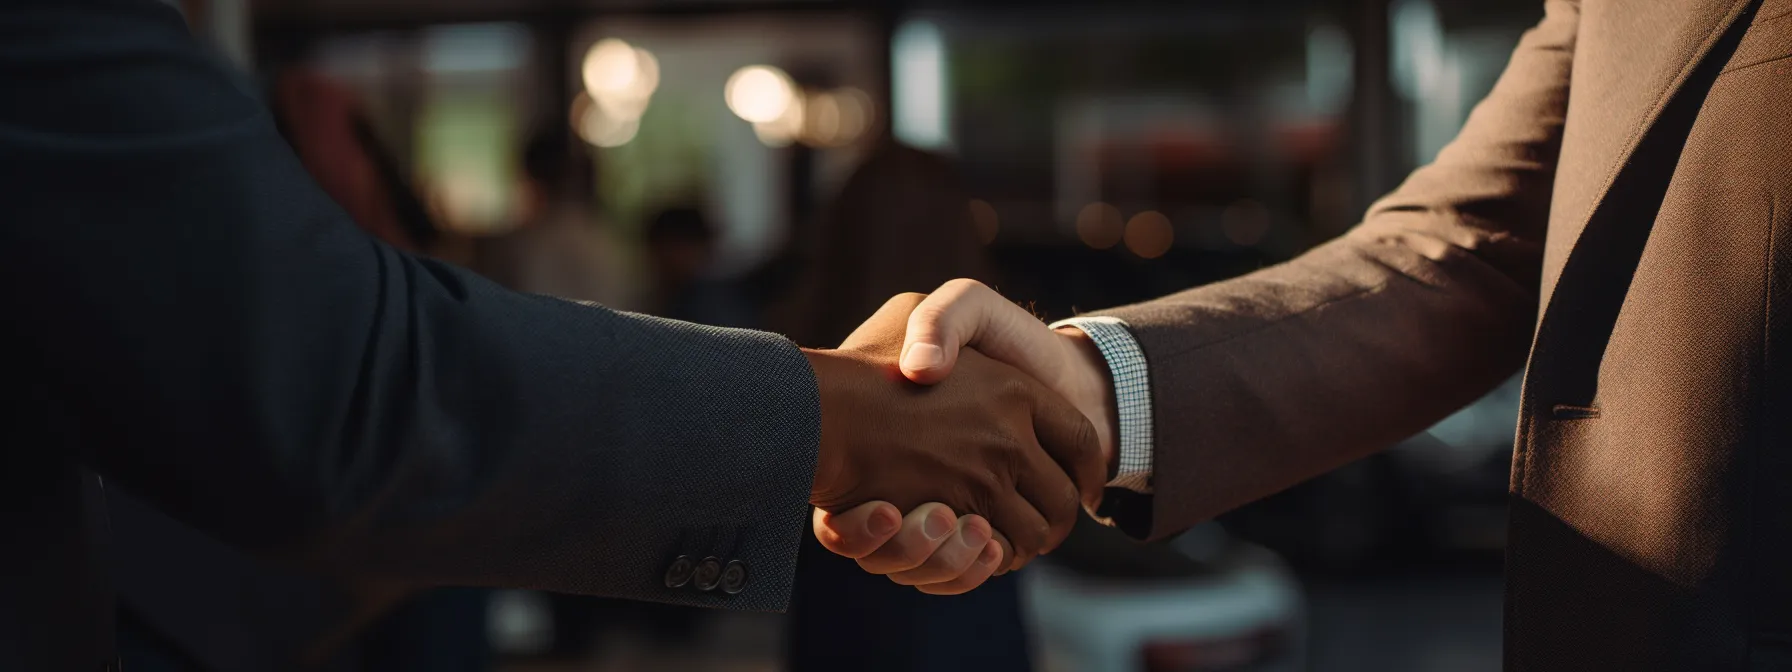 a law firm representative shaking hands with a representative from a local business at a community event.